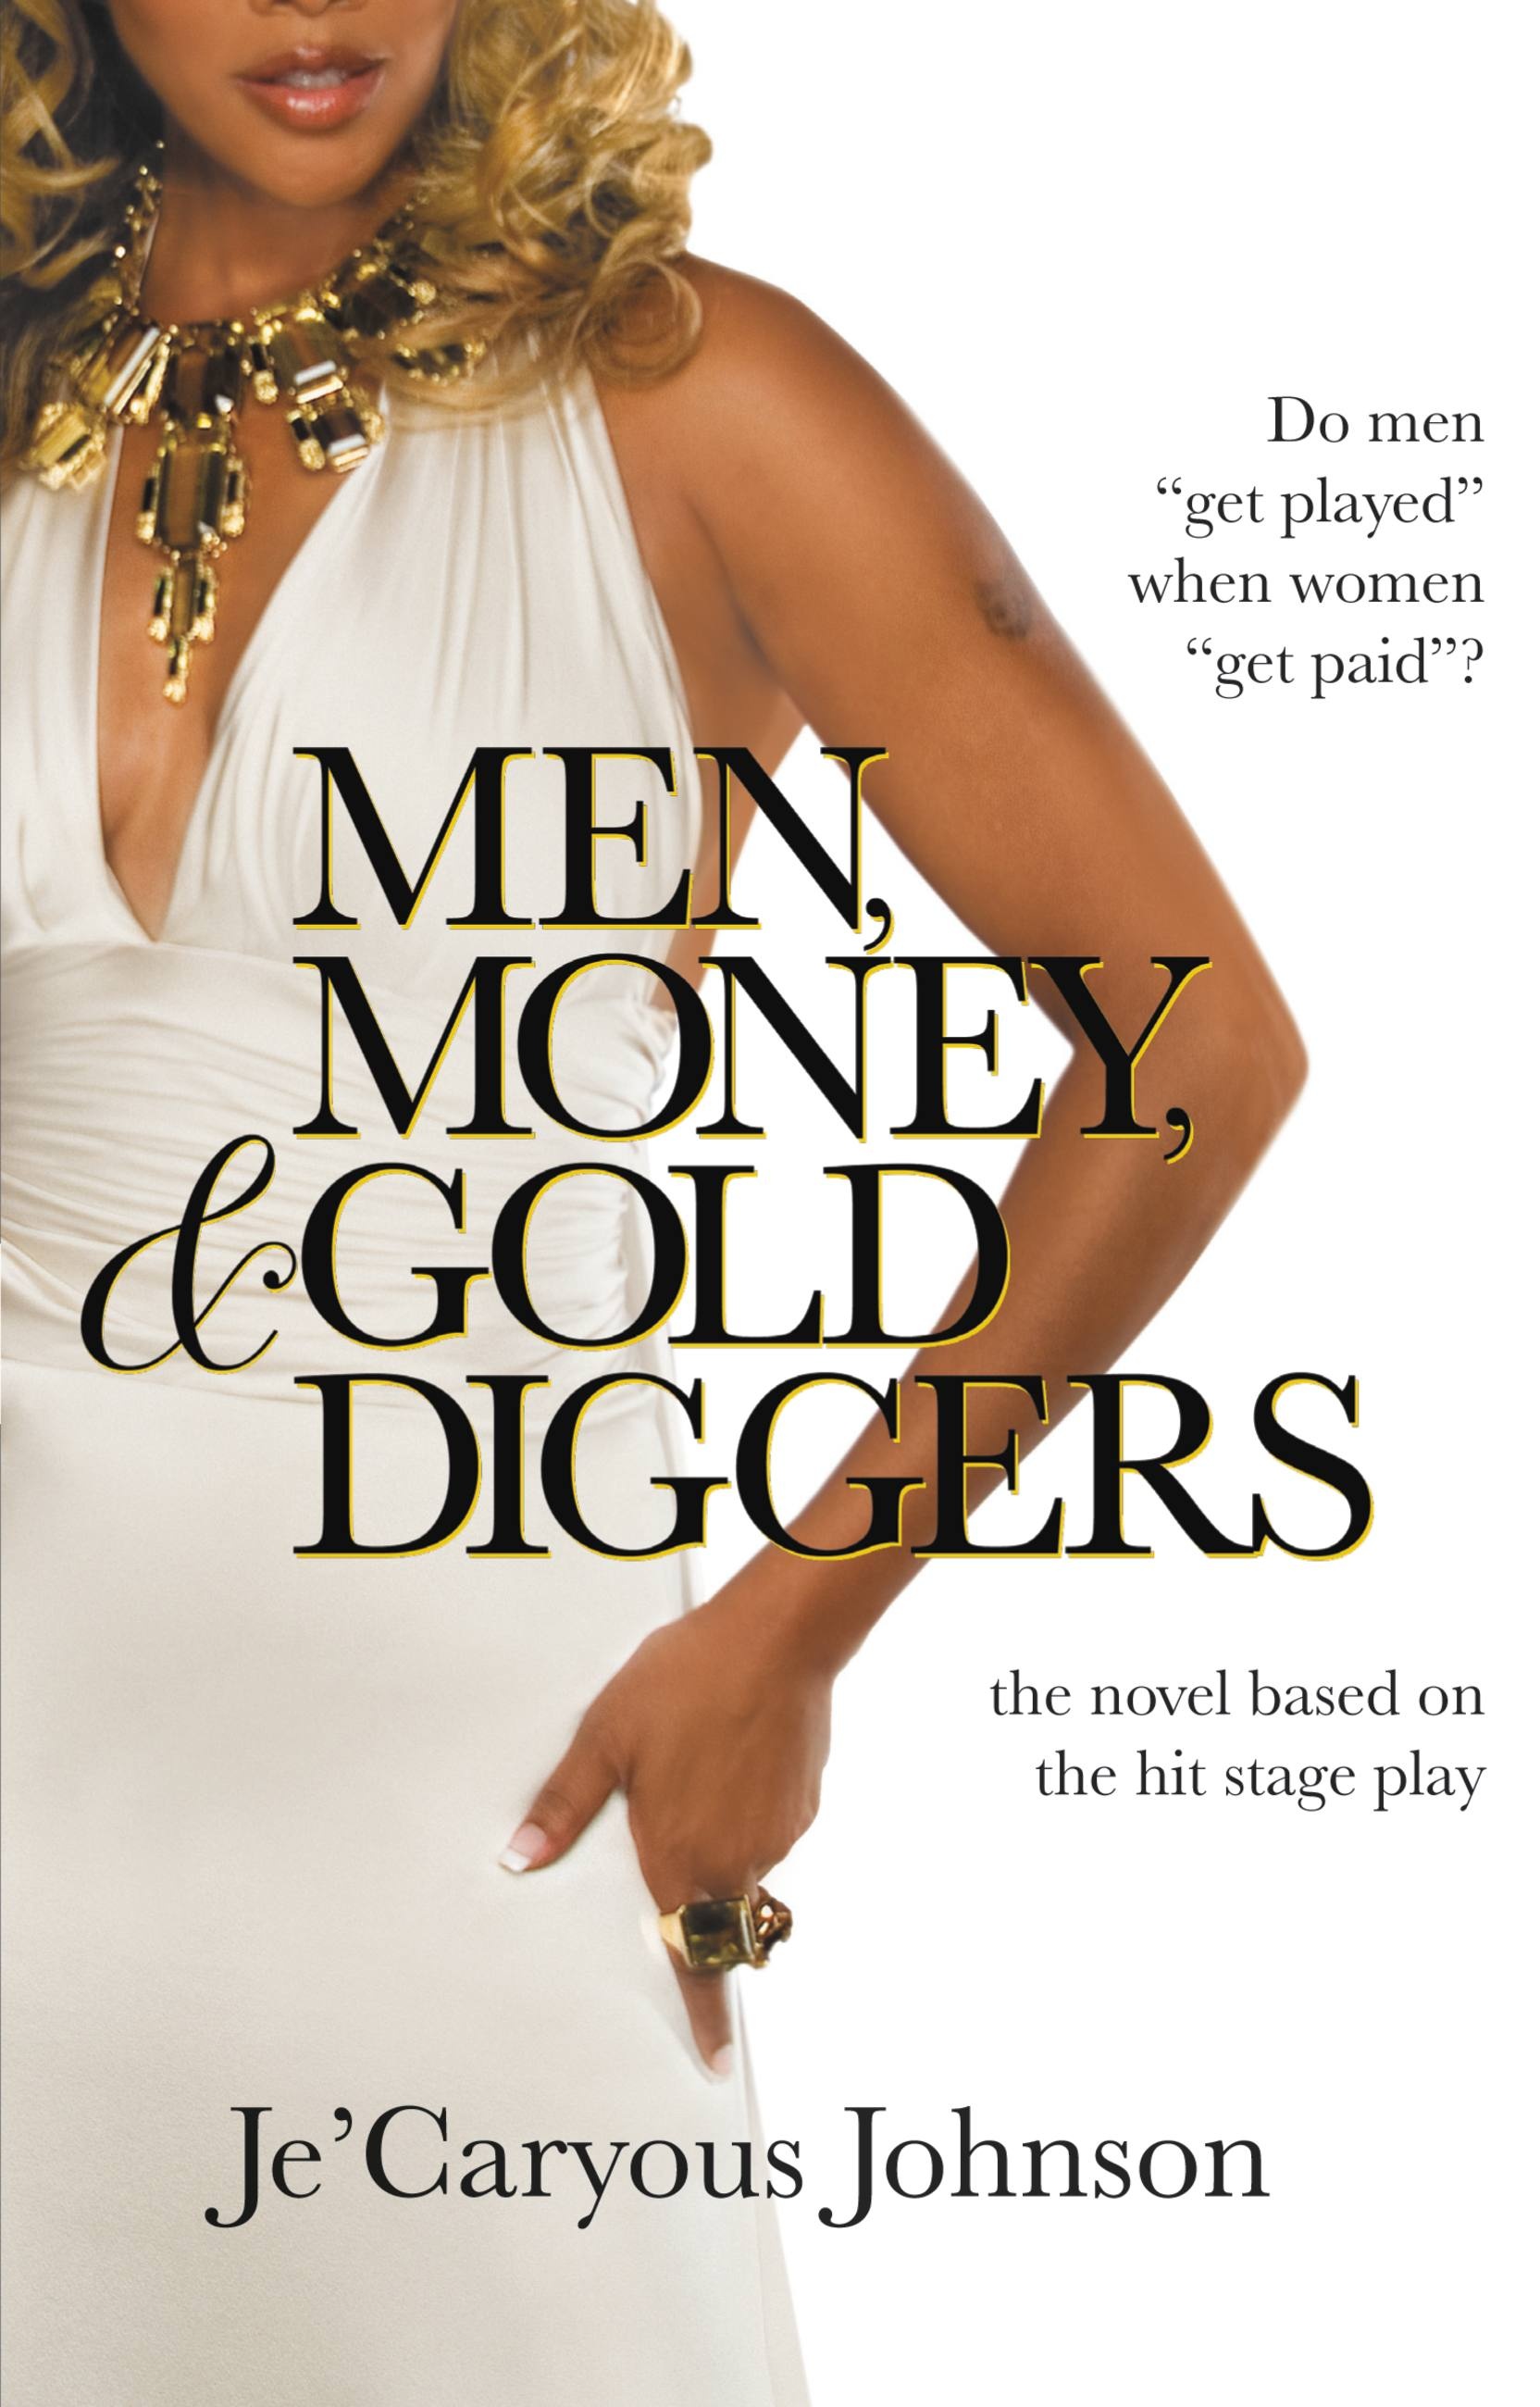 Men, Money, & Gold Diggers by Je'Caryous Johnson | Hachette Book Group